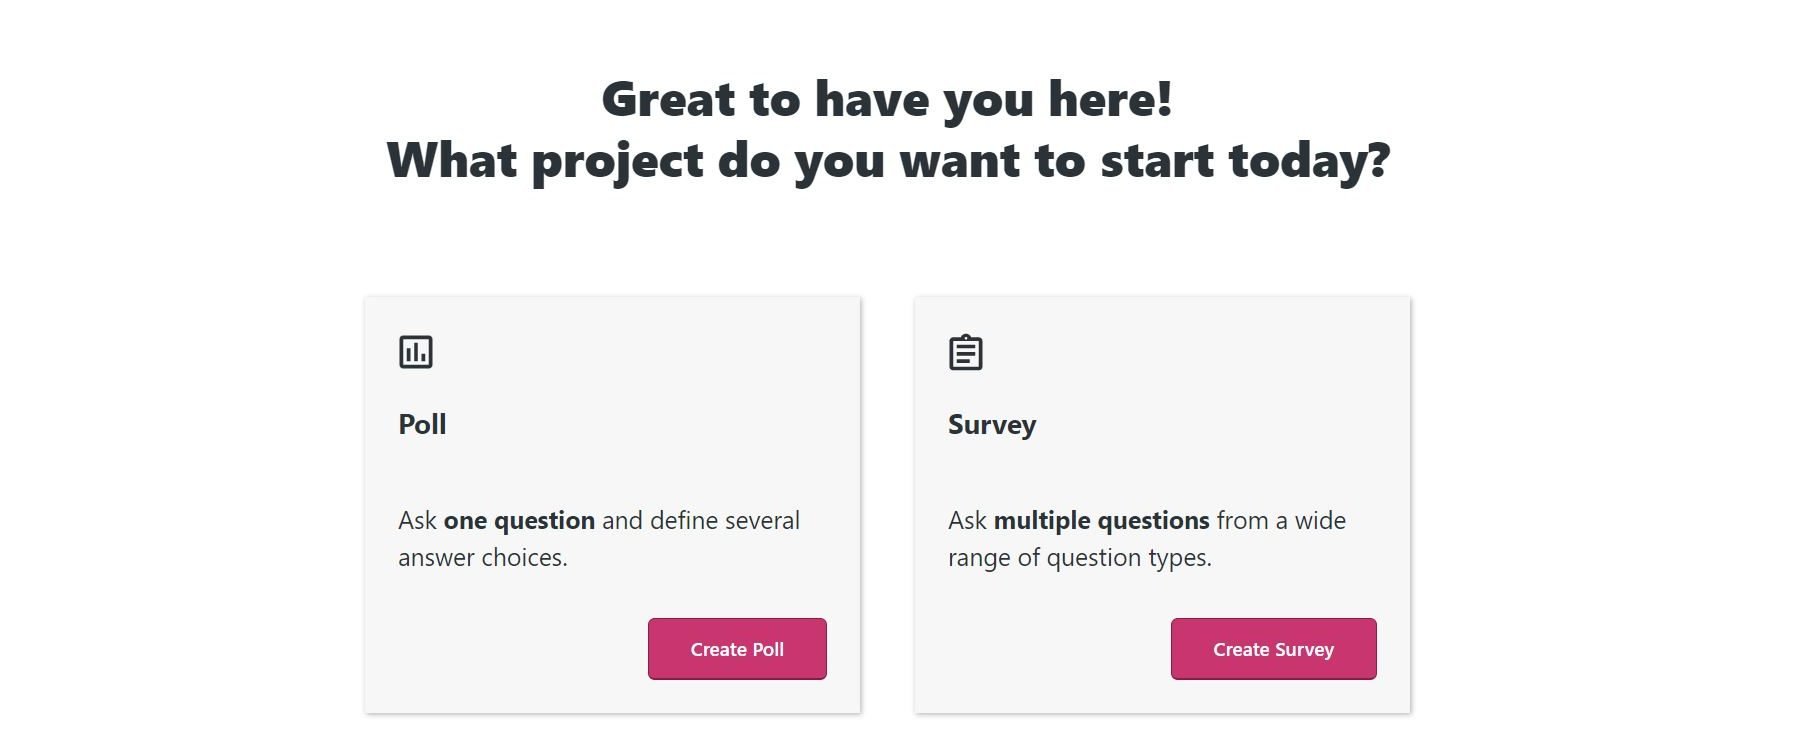 Creating a new poll or survey in Crowdsignal